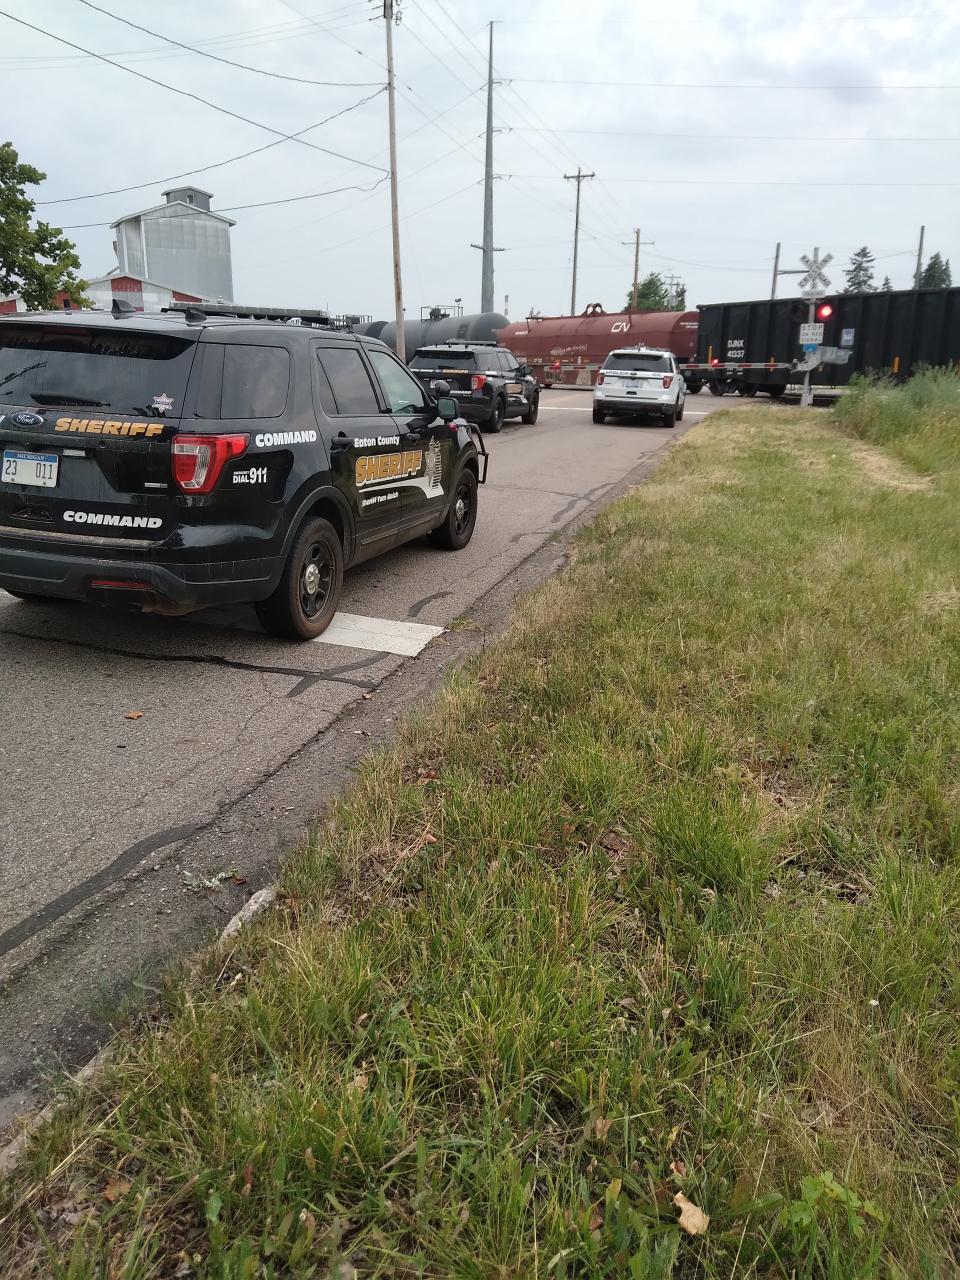 Police vehicles were staged at the Millett Highway train crossing in Delta Township on Friday evening.